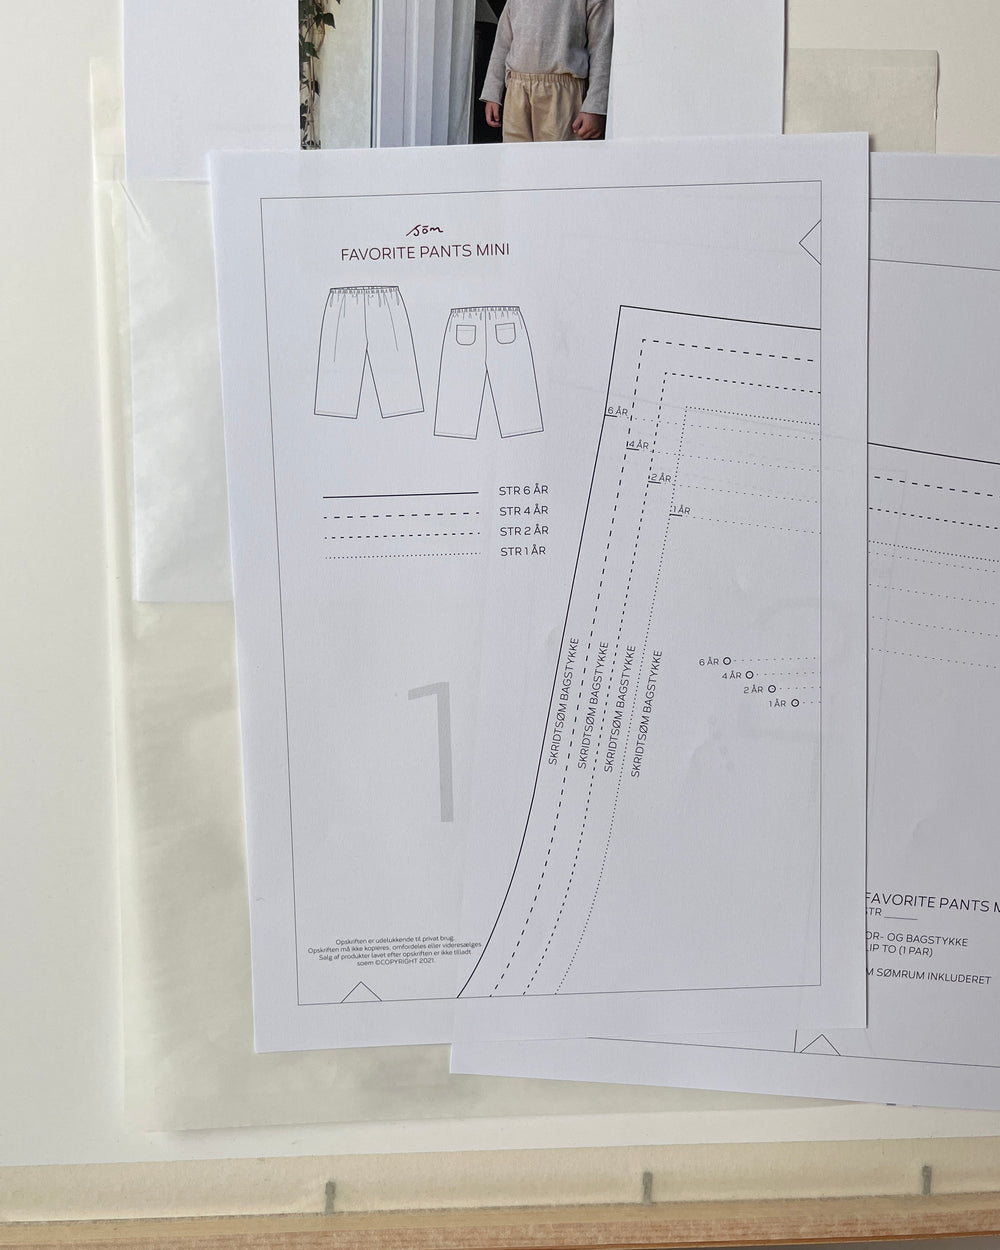 Sewing patterns - A closer look at format